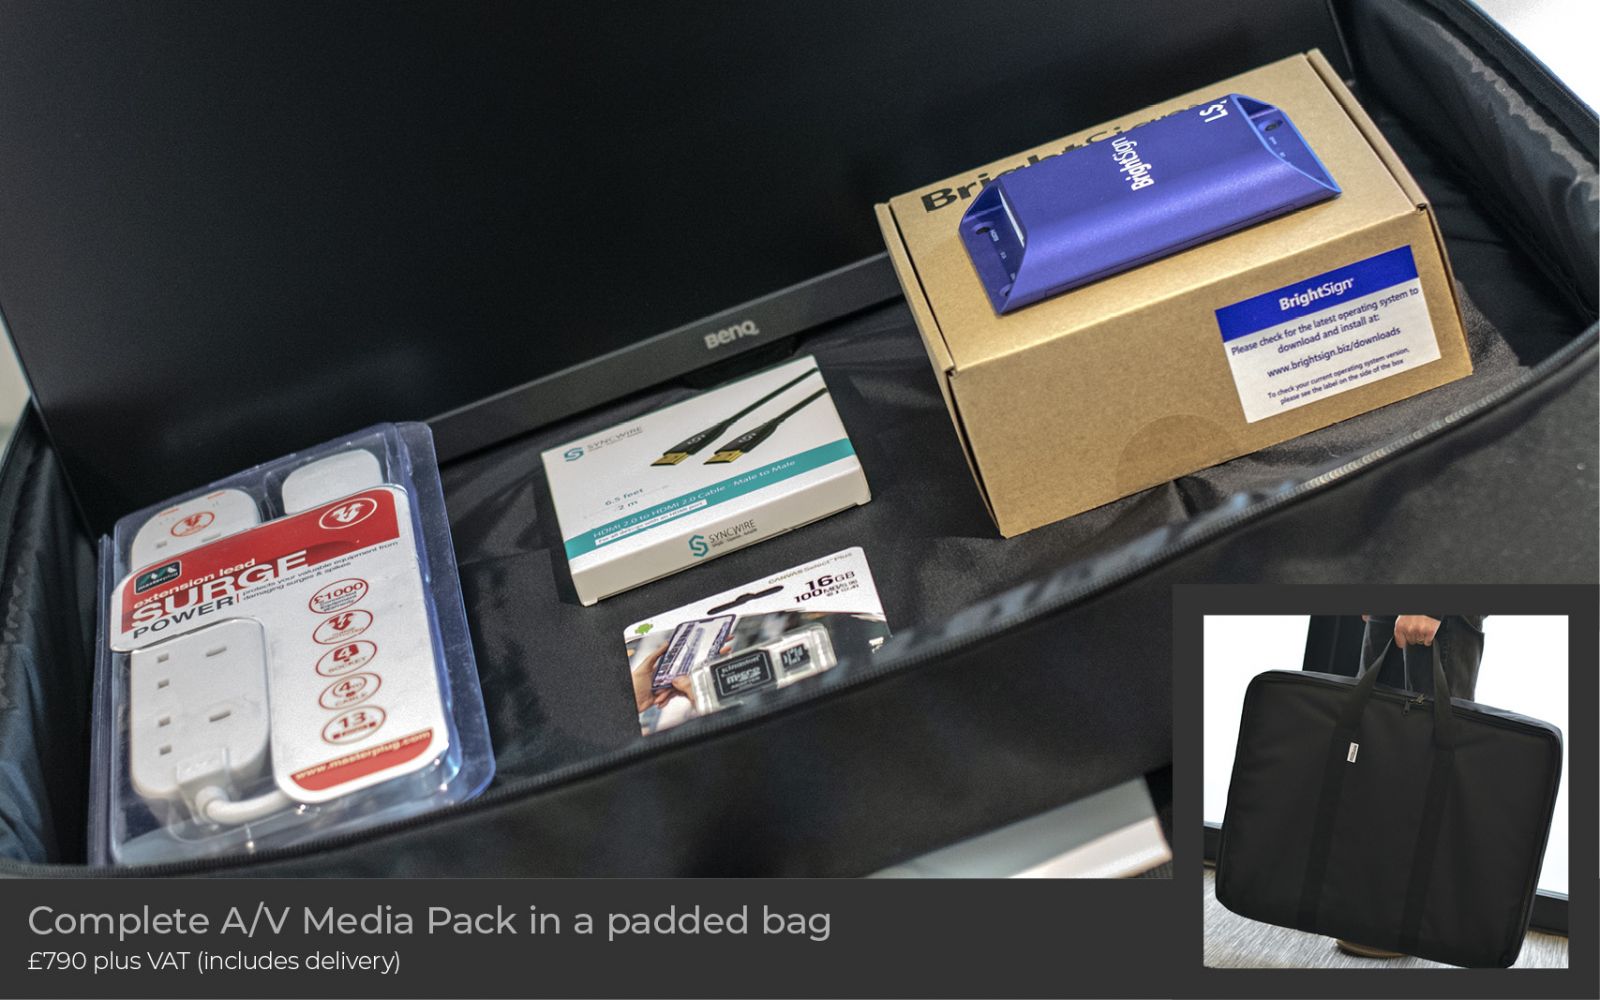 X-Media Pack and Padded Bag